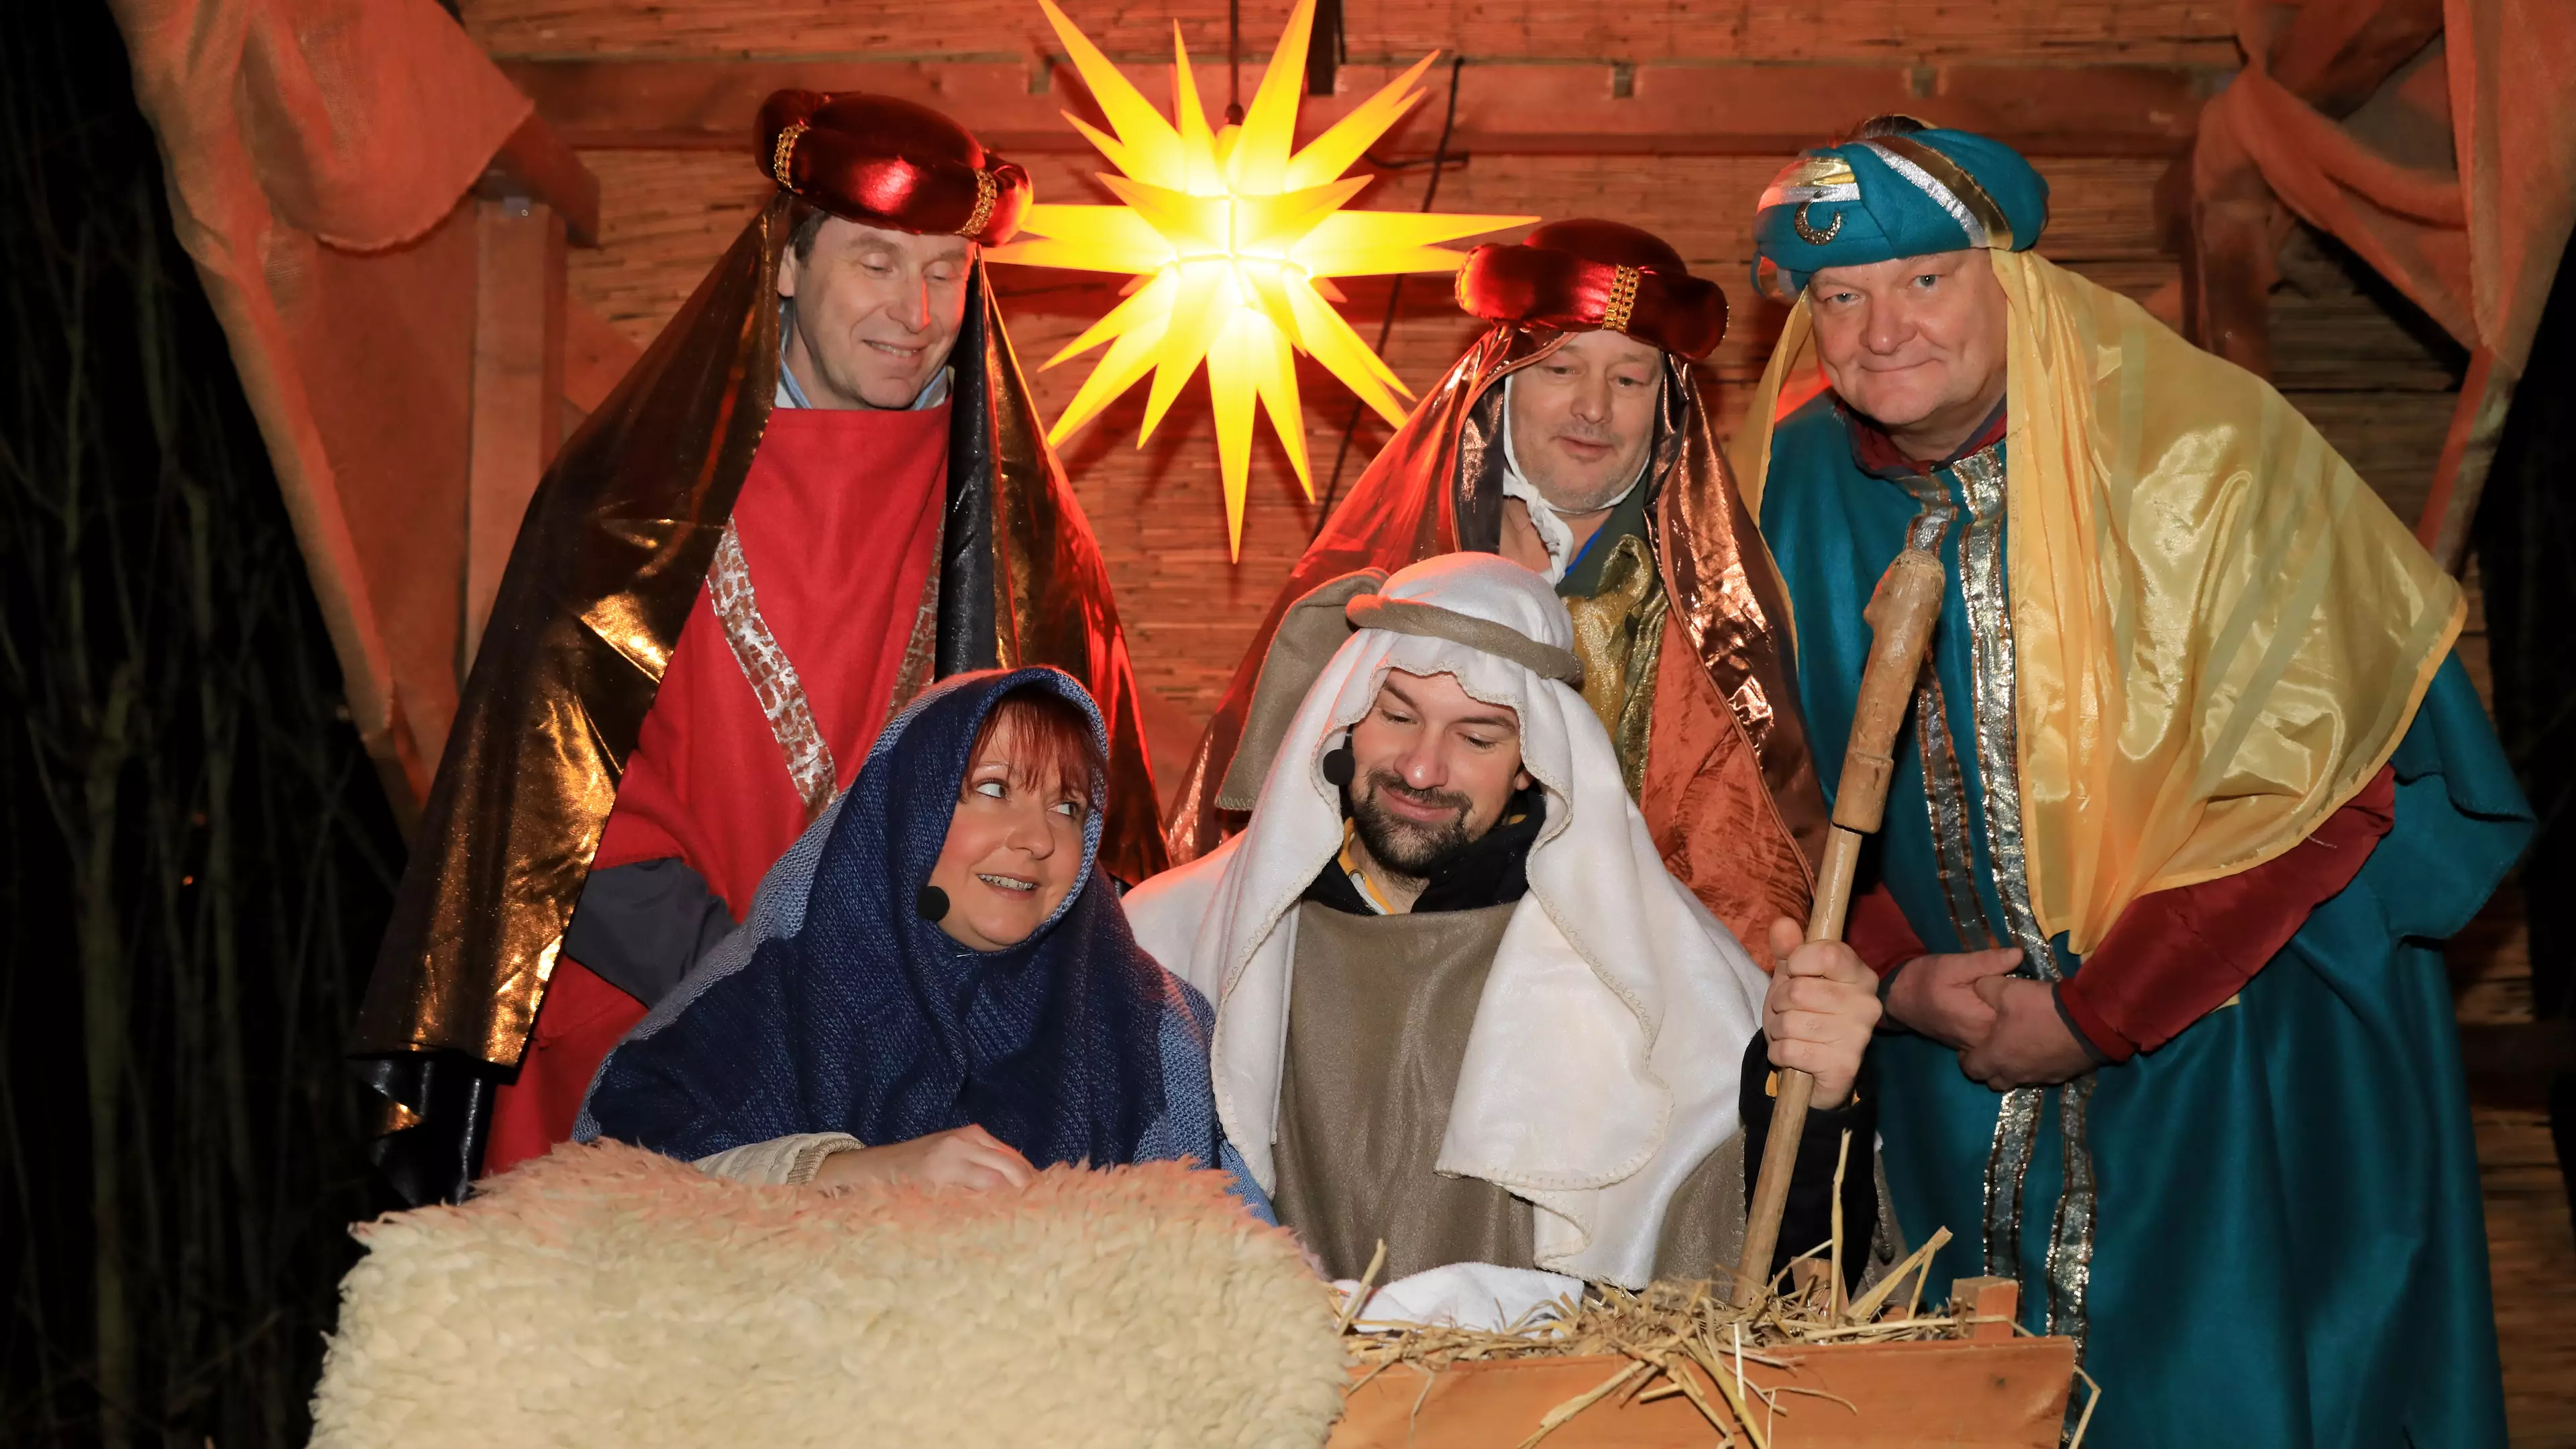 Looking Back At Some Of Our Worst Nativity Experiences